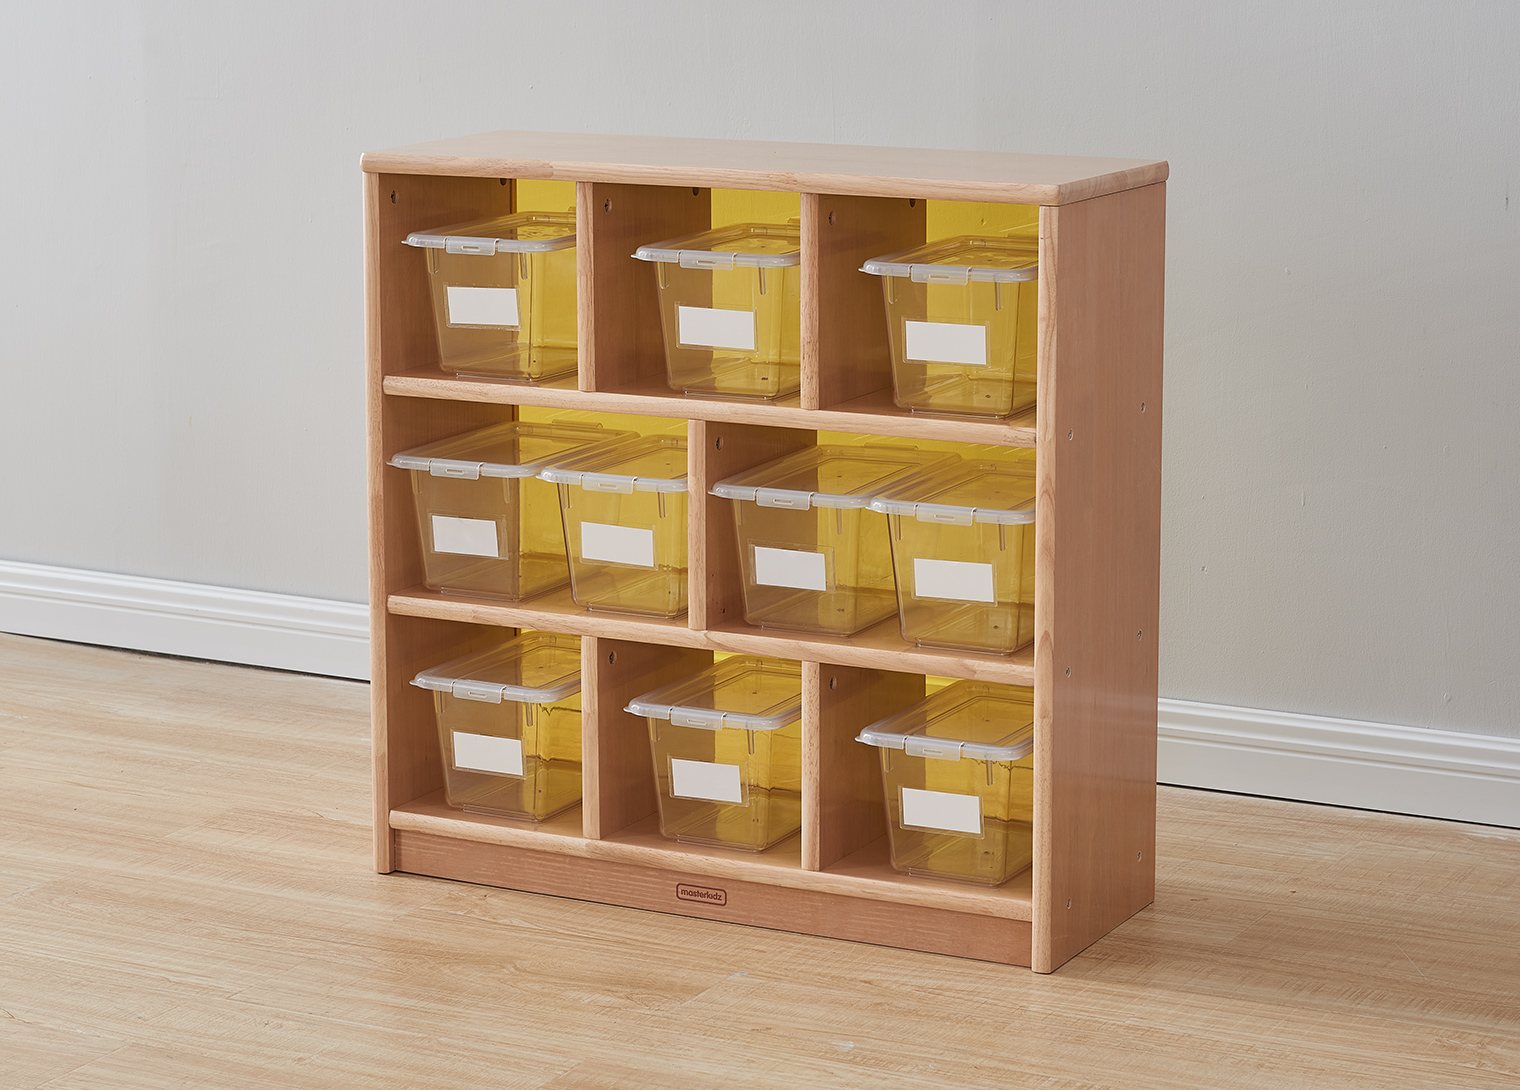 Forest School - 789H x 810L Wooden  8-Compartment Shelving Unit - Translucent Yellow Back